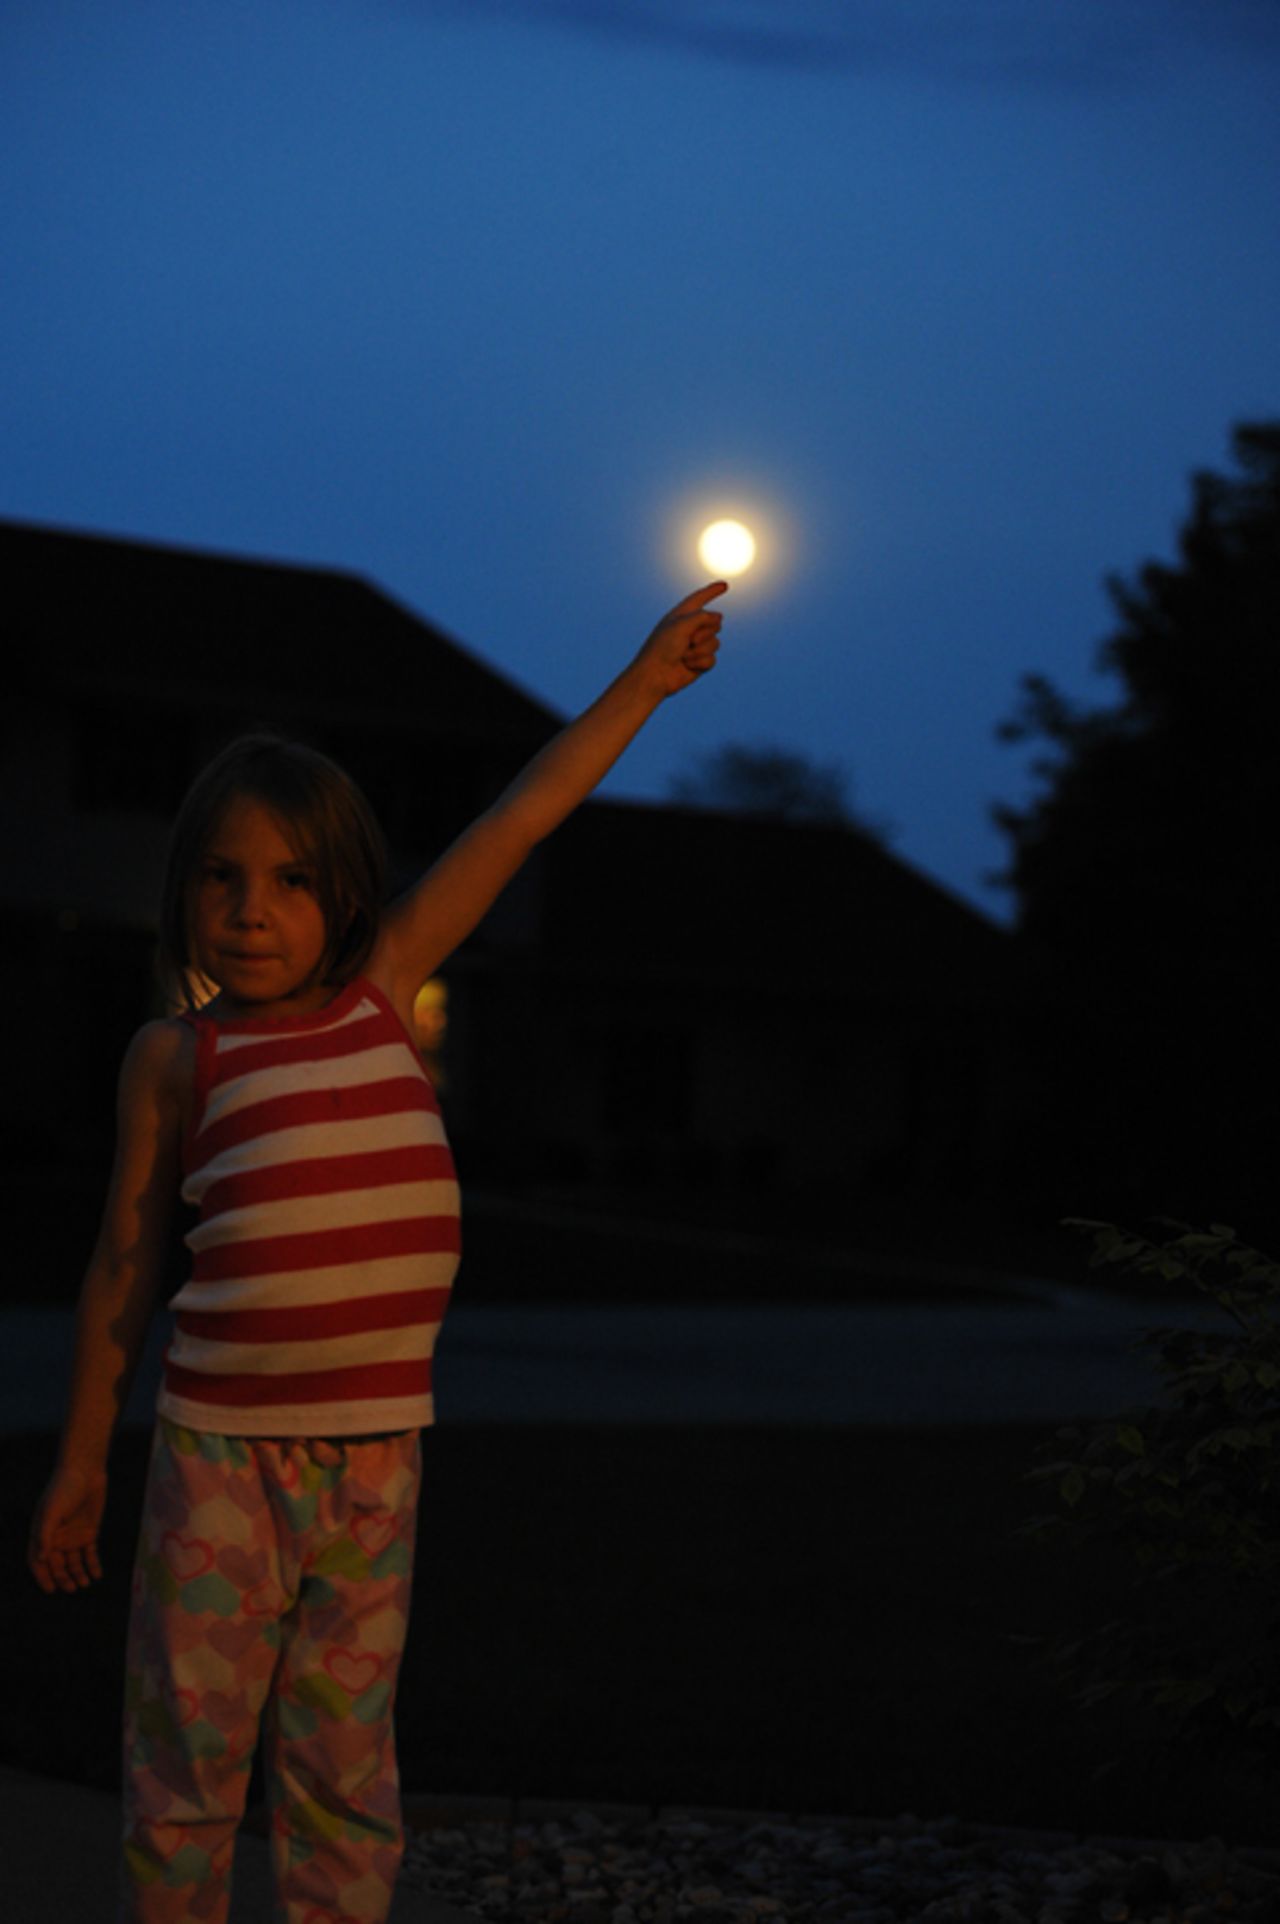 <a href="http://ireport.cnn.com/docs/DOC-994716">Sarah Schmidt</a> captured her daughter Katelyn in an E.T.-inspired pose in Neenah, Wisconsin.